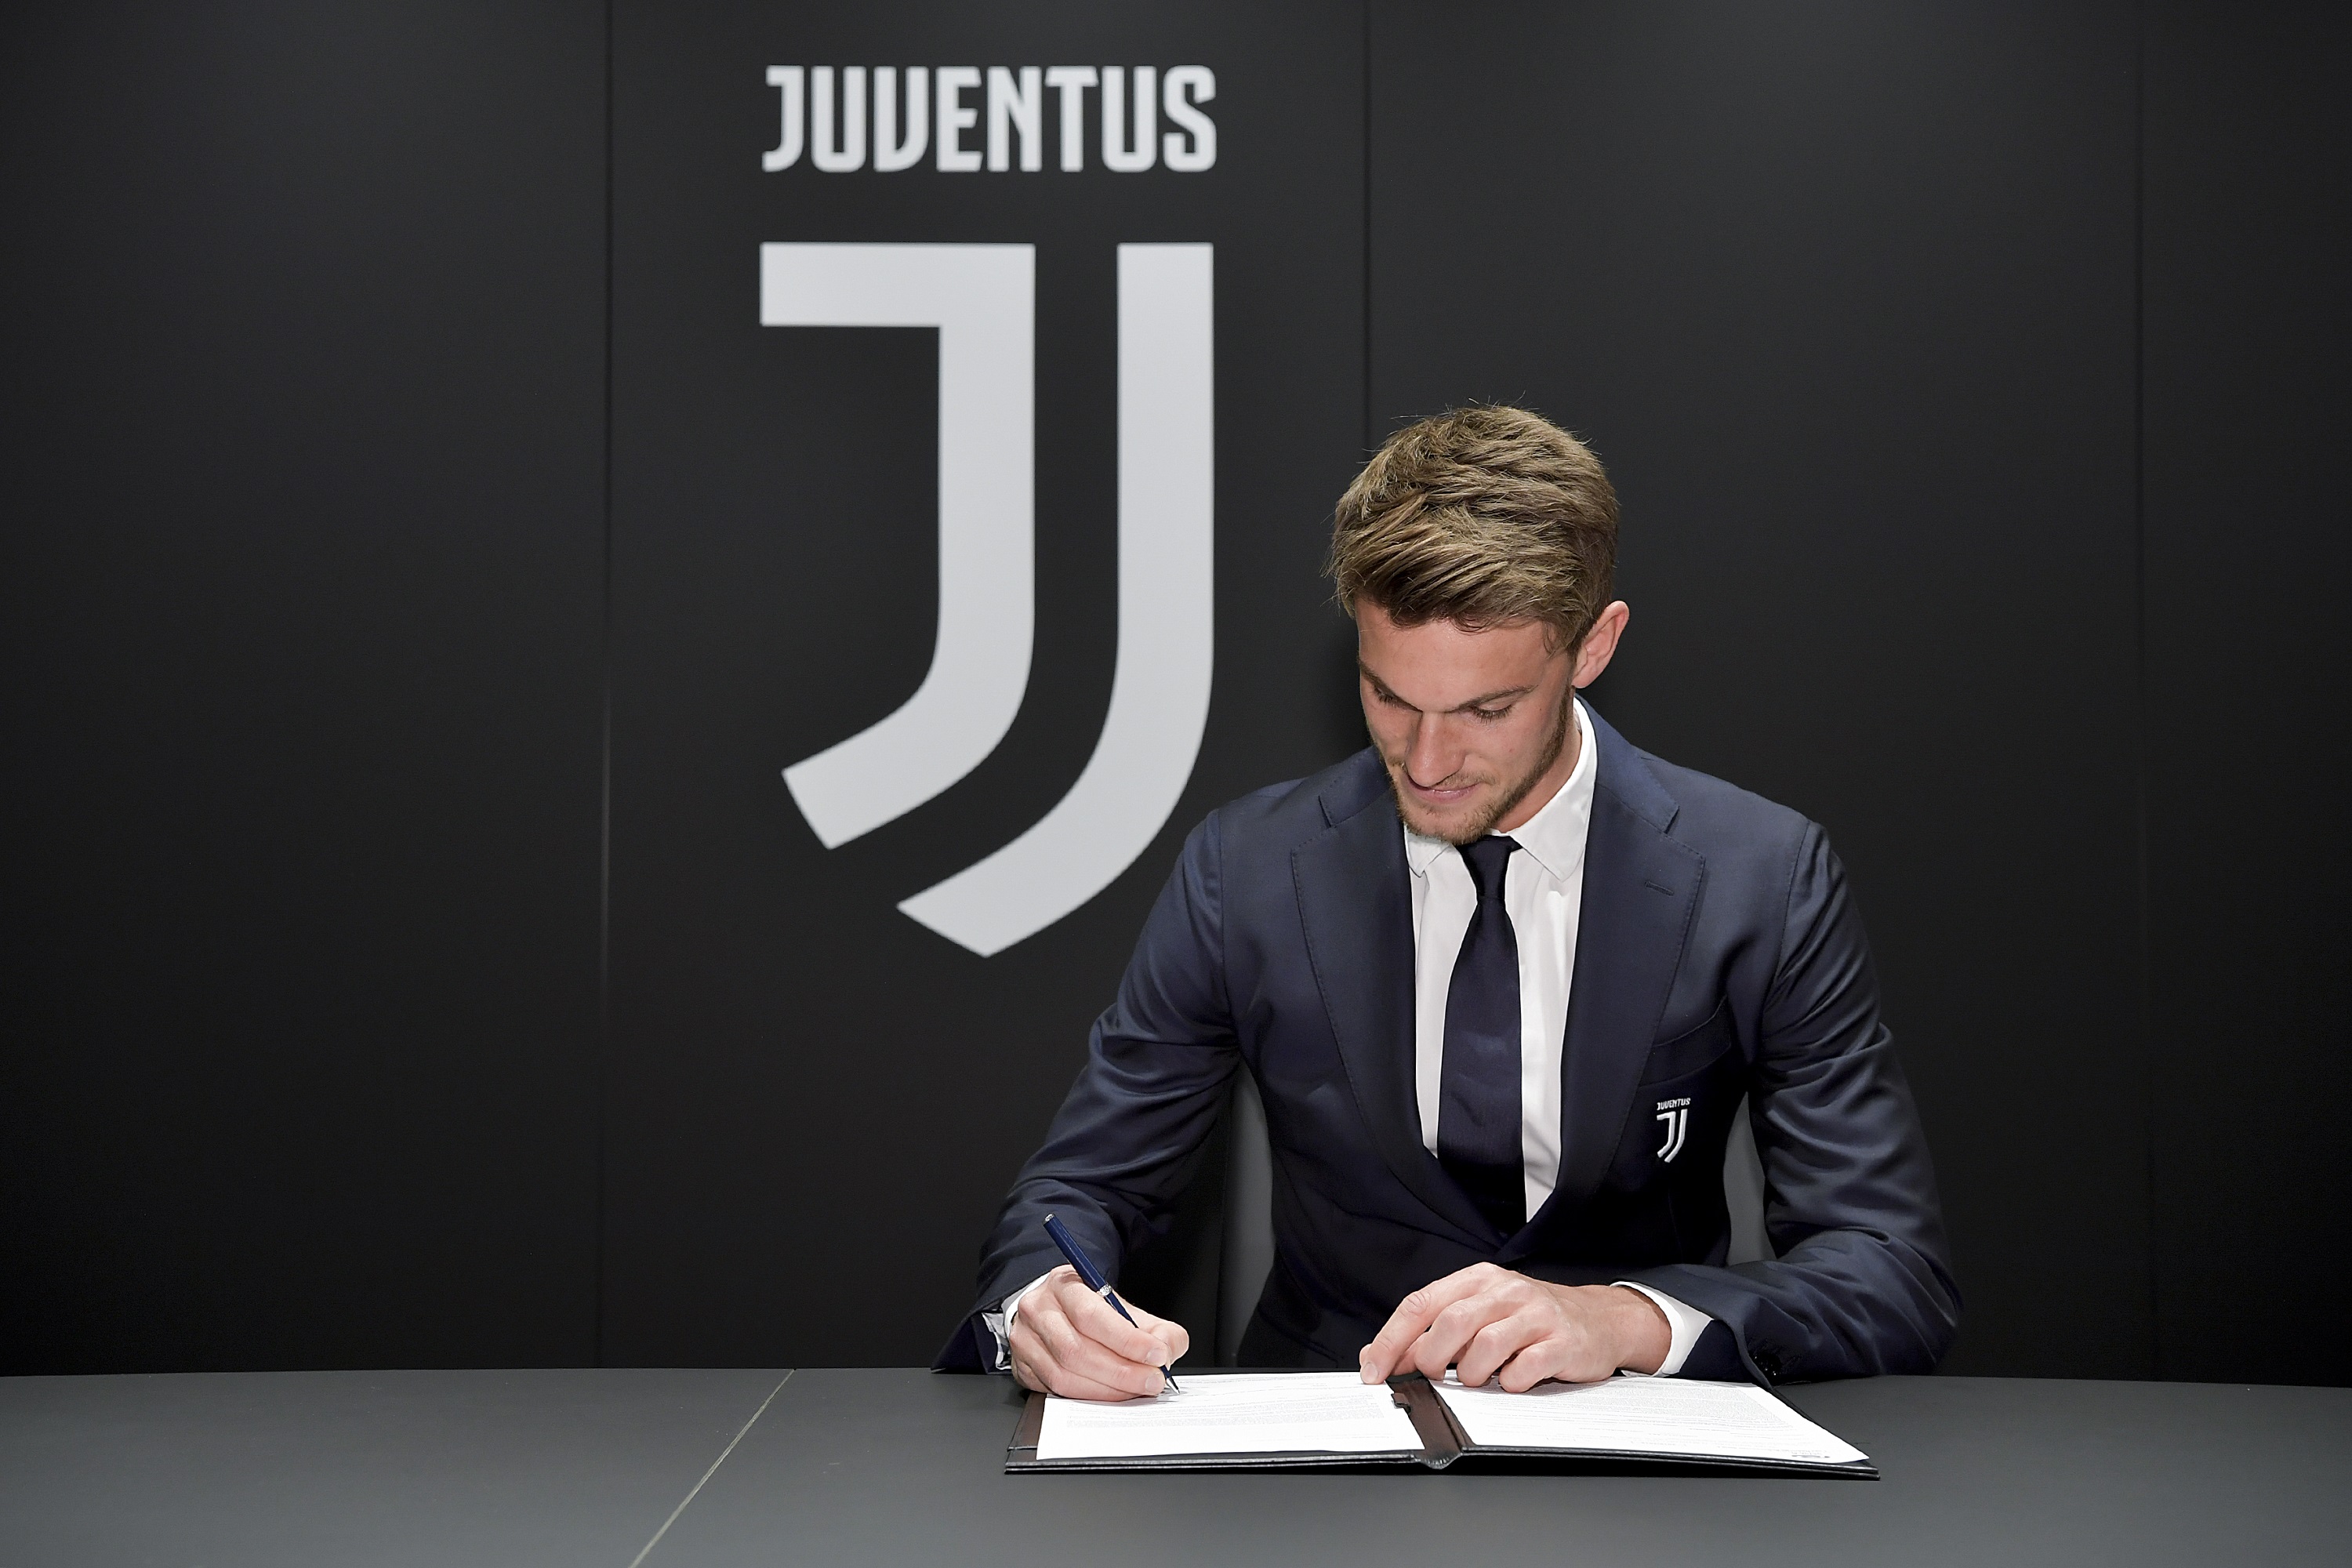 TURIN, ITALY - MARCH 28: Juventus player Daniele Rugani extends his contract with Juventus at Juventus headquarters on March 28, 2019 in Turin, Italy. (Photo by Daniele Badolato - Juventus FC/Juventus FC via Getty Images)